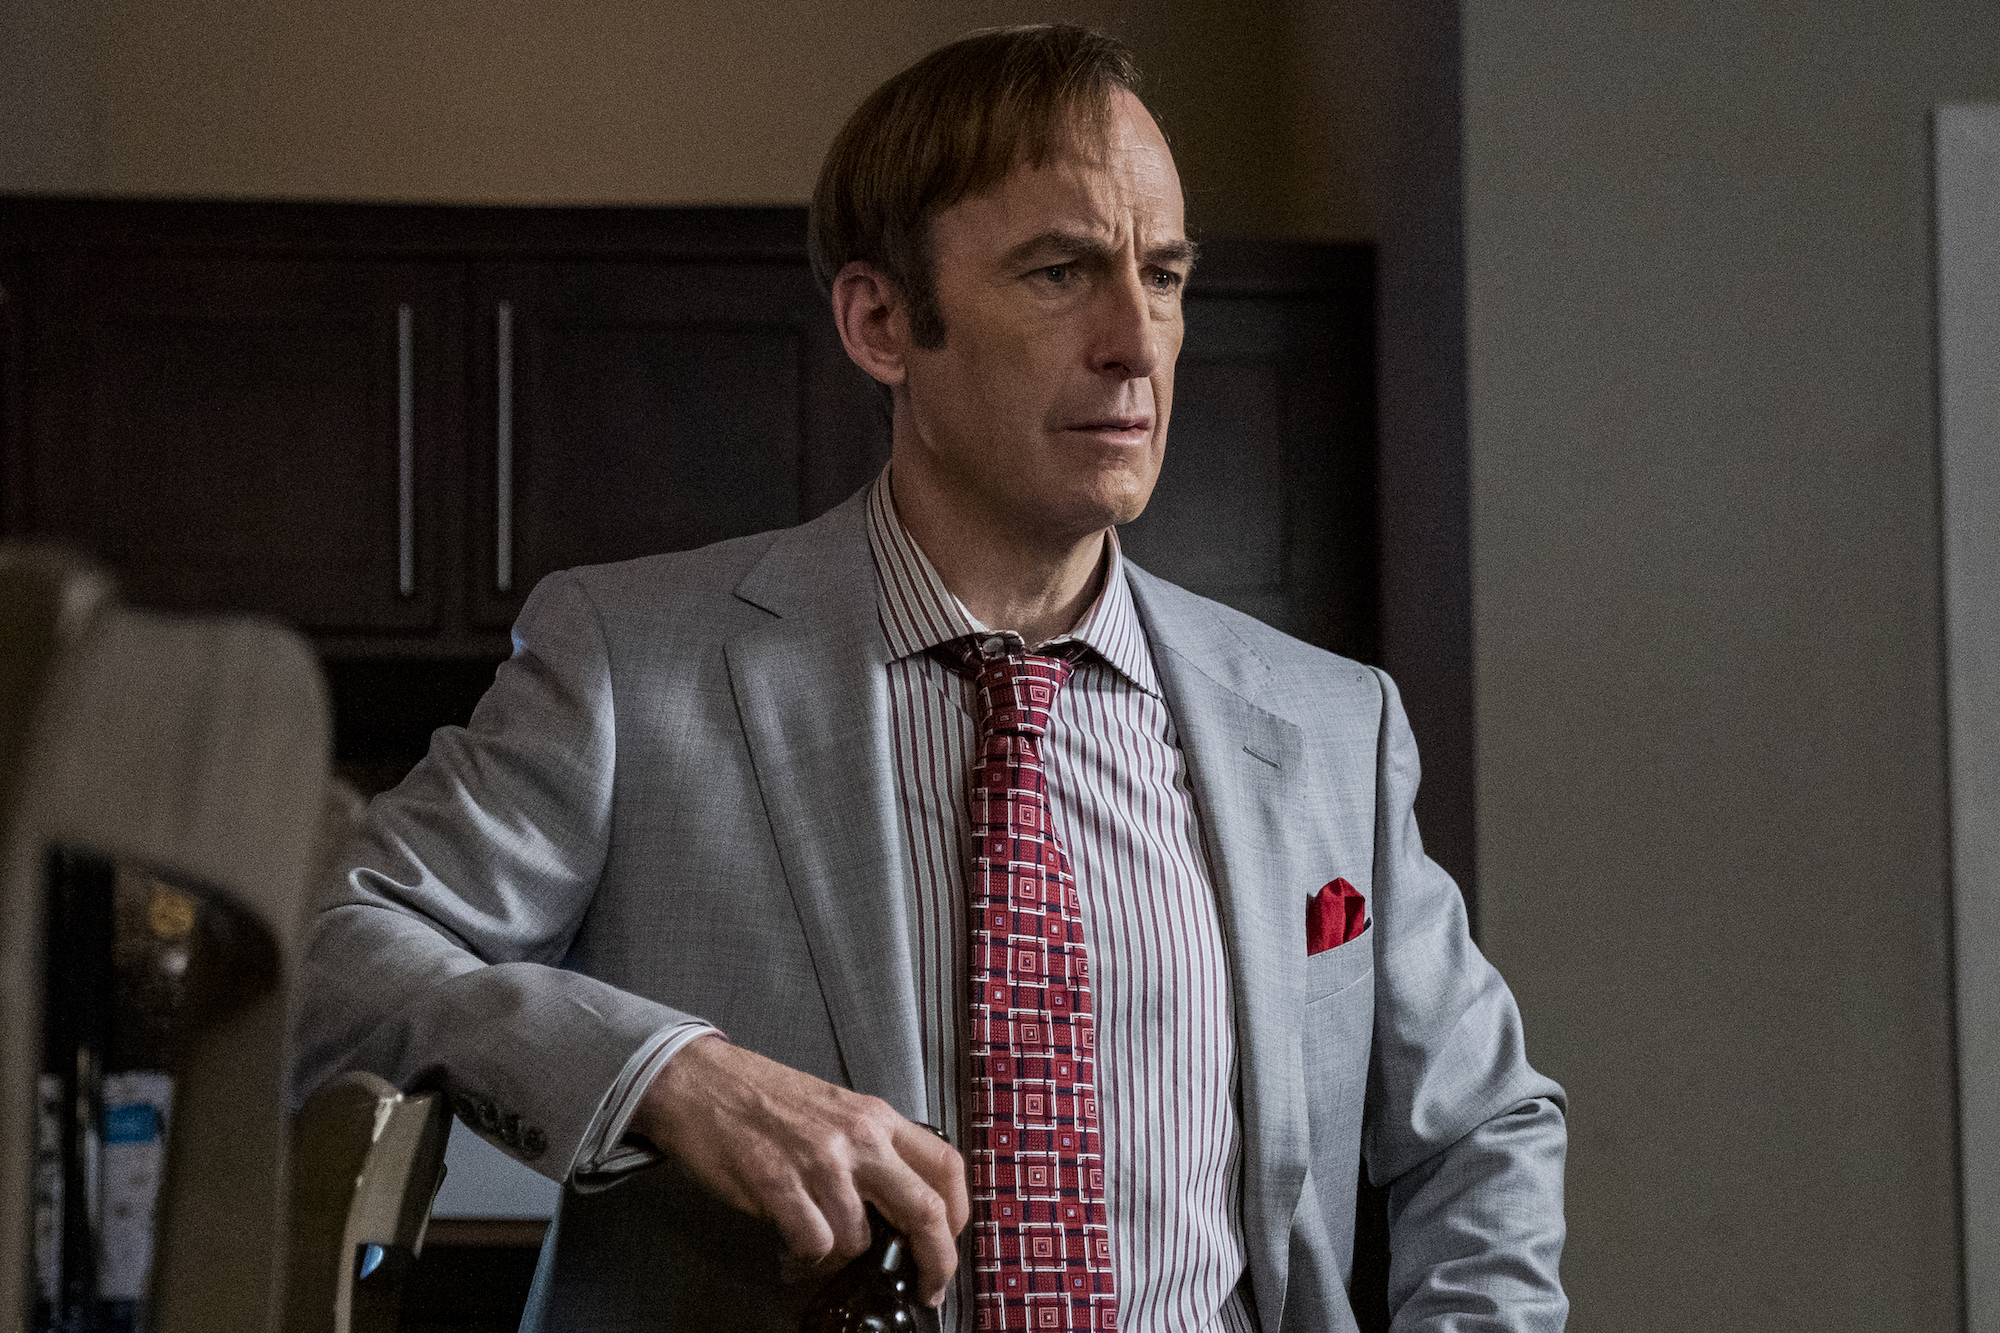 'Better Call Saul' Season 6: Bob Odenkirk holds something in his right hand